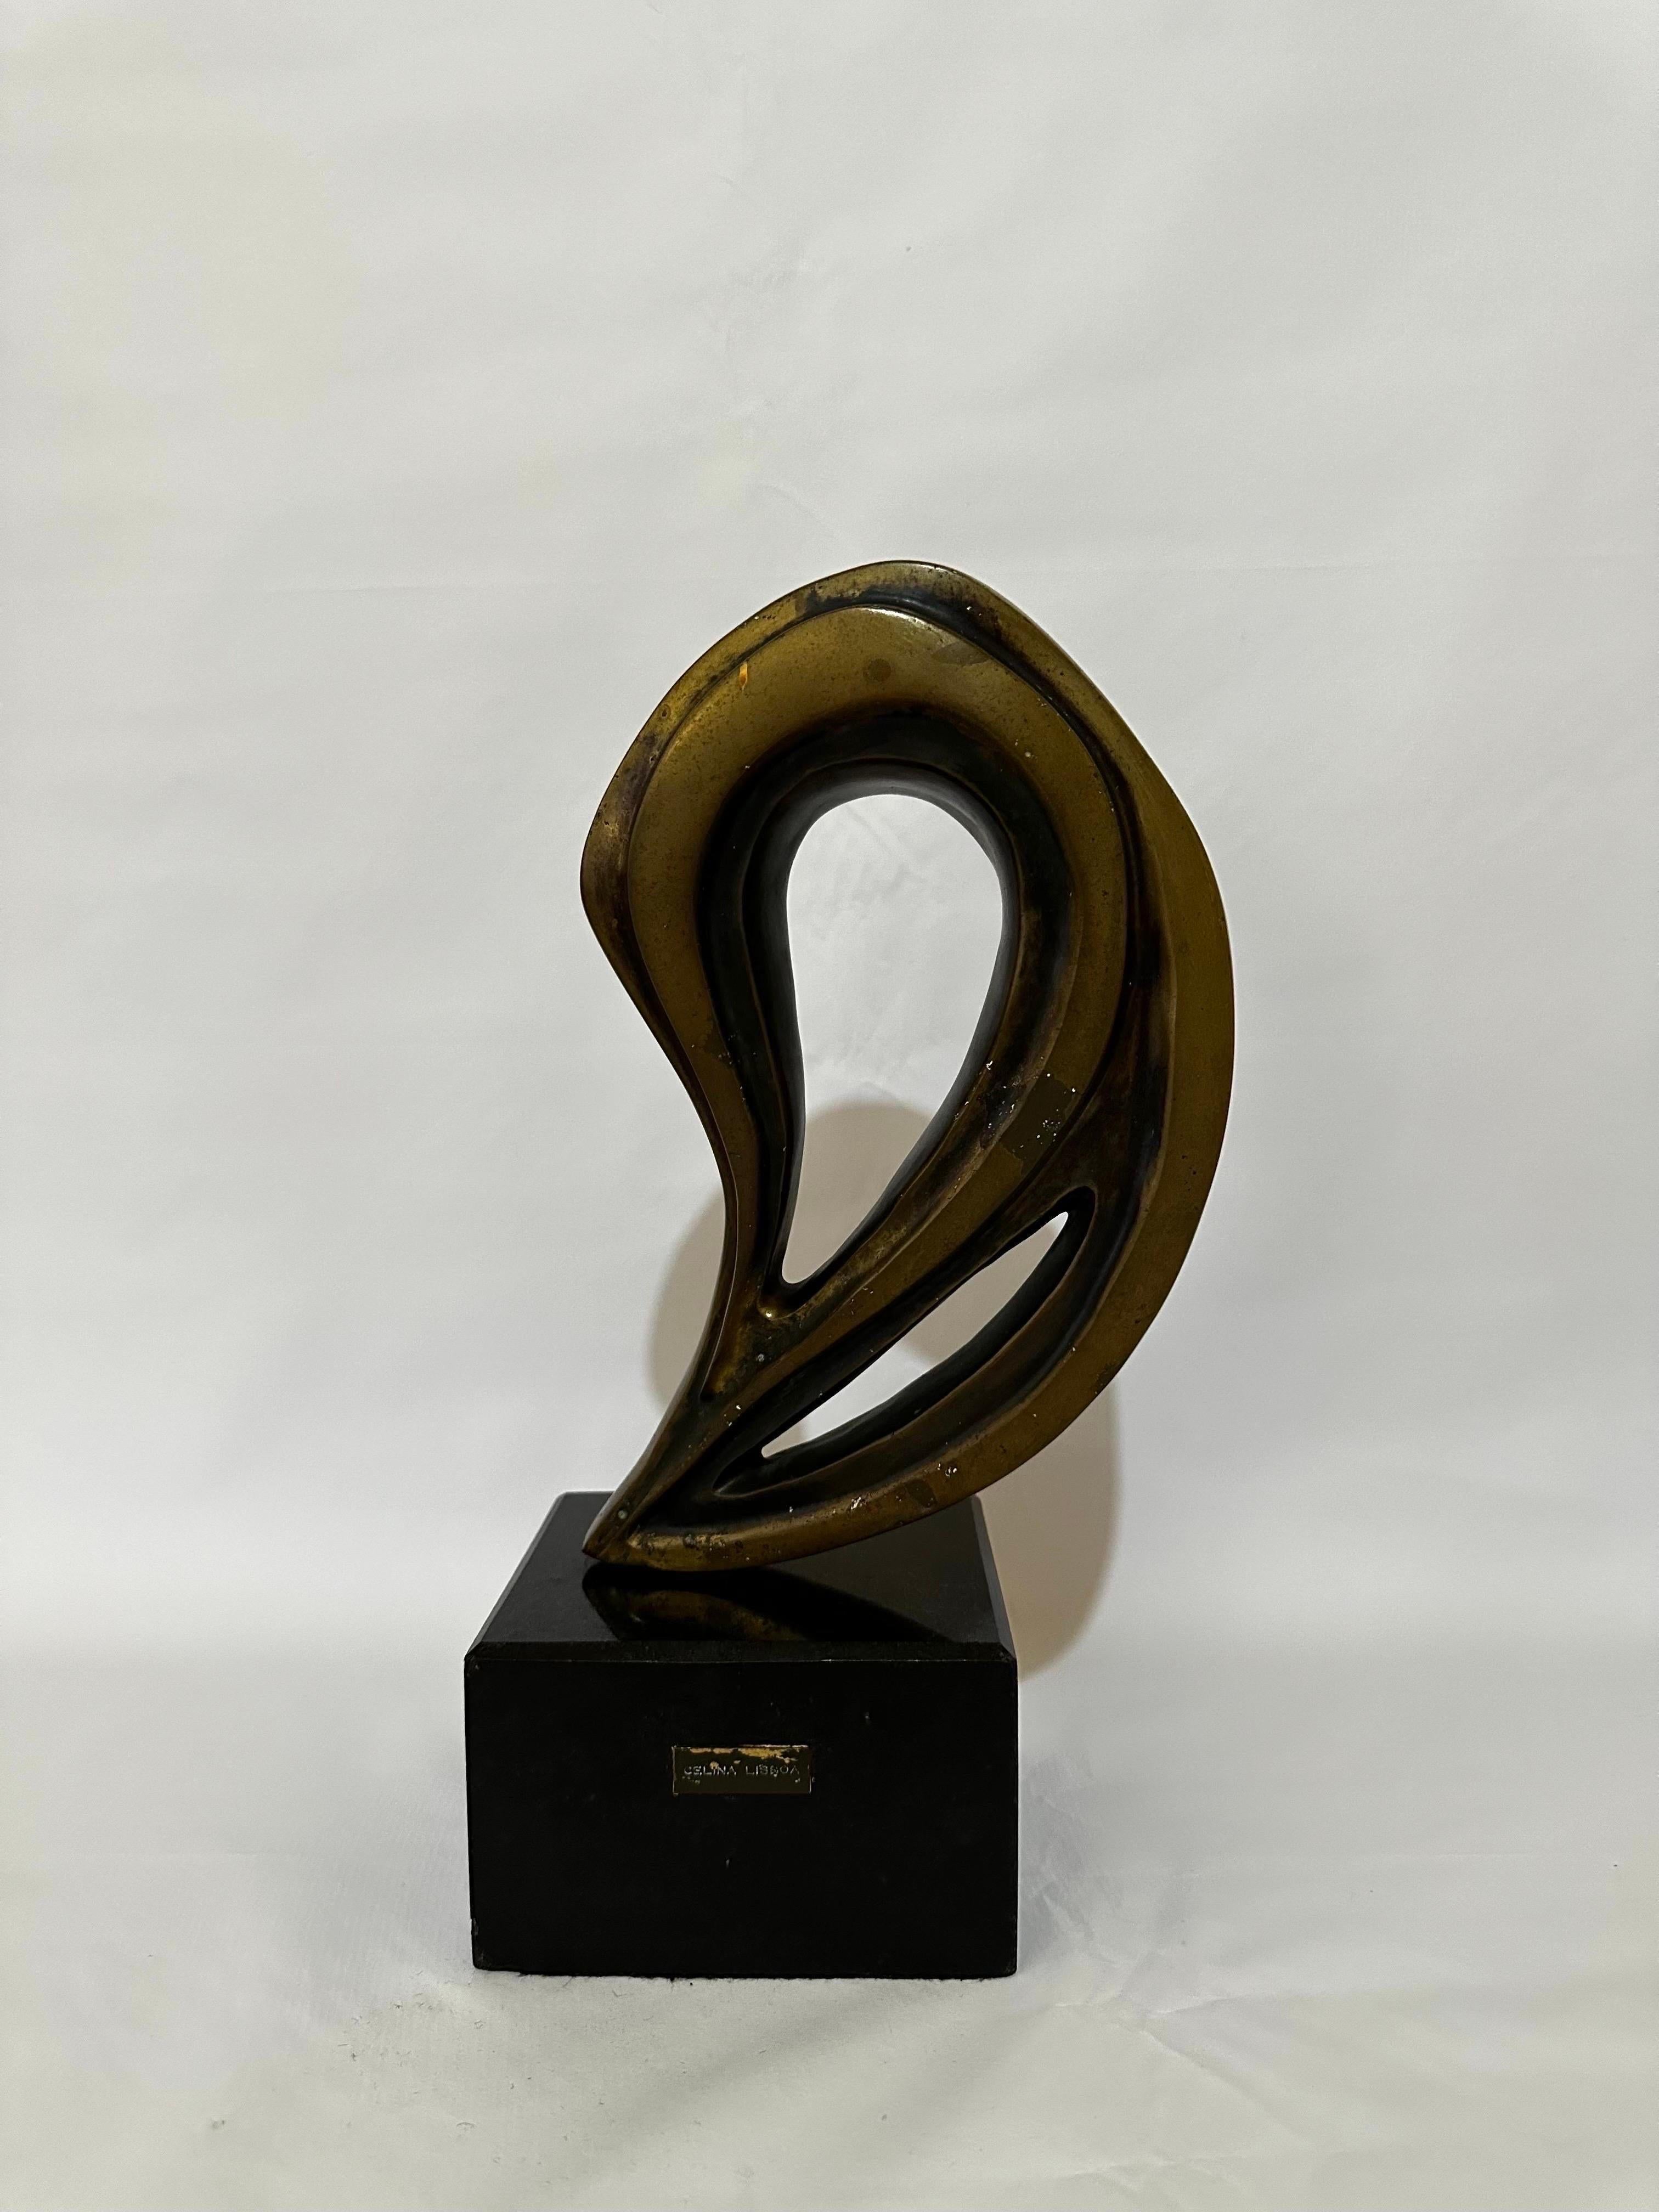 Brazilian Modern abstract bronze sculpture on granite vase by renowned sculptor Celina Lisboa. Signed on bronze and maintains label on base. Numbered 1/6 circa 1980s.